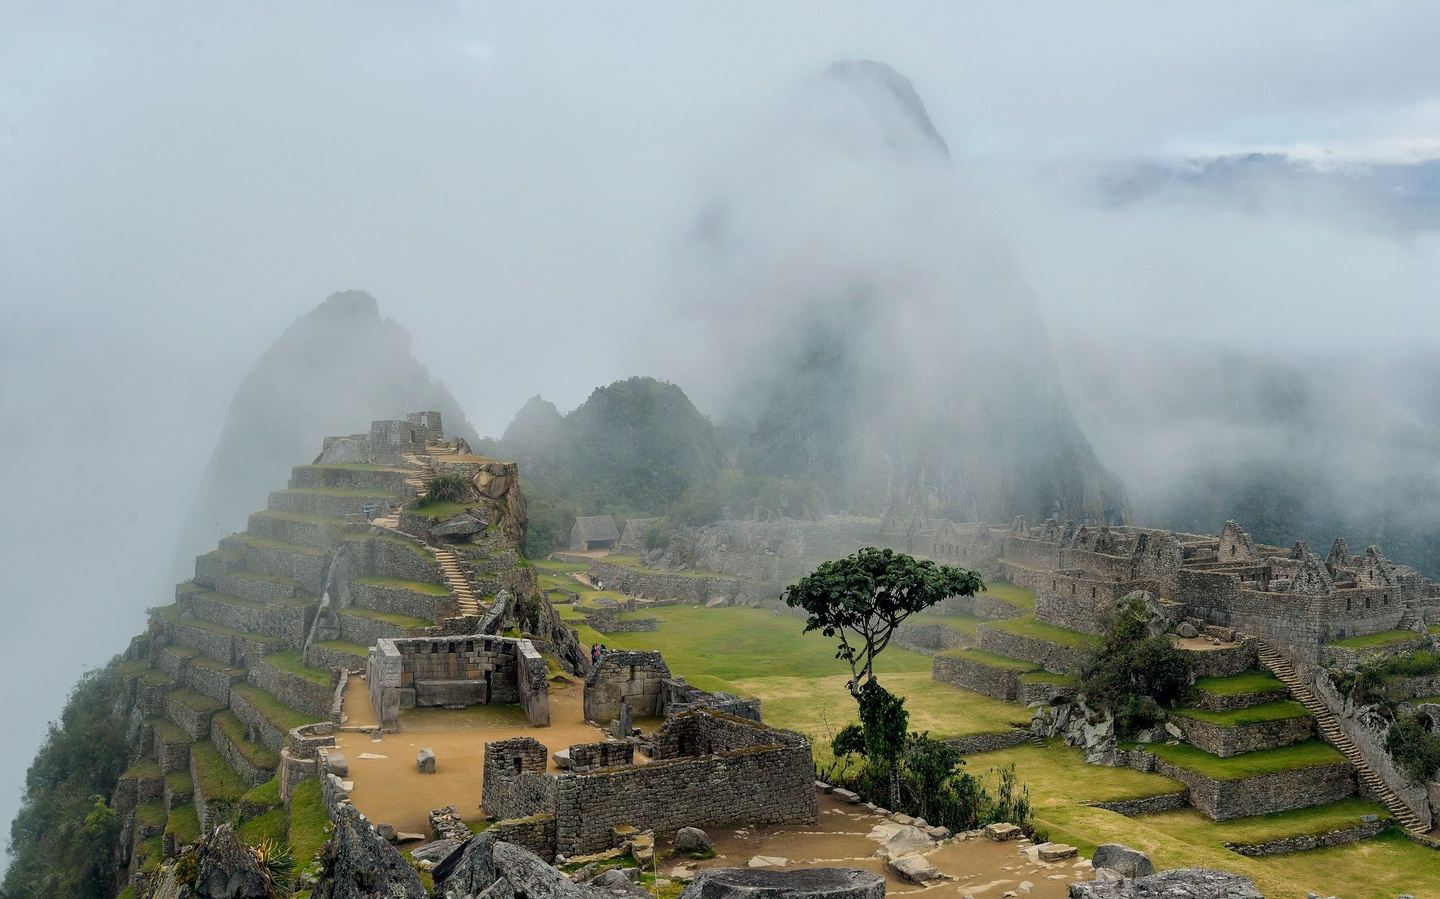 Andean Trail & Amazon Adventure - From Sacred Valleys To Rainforests